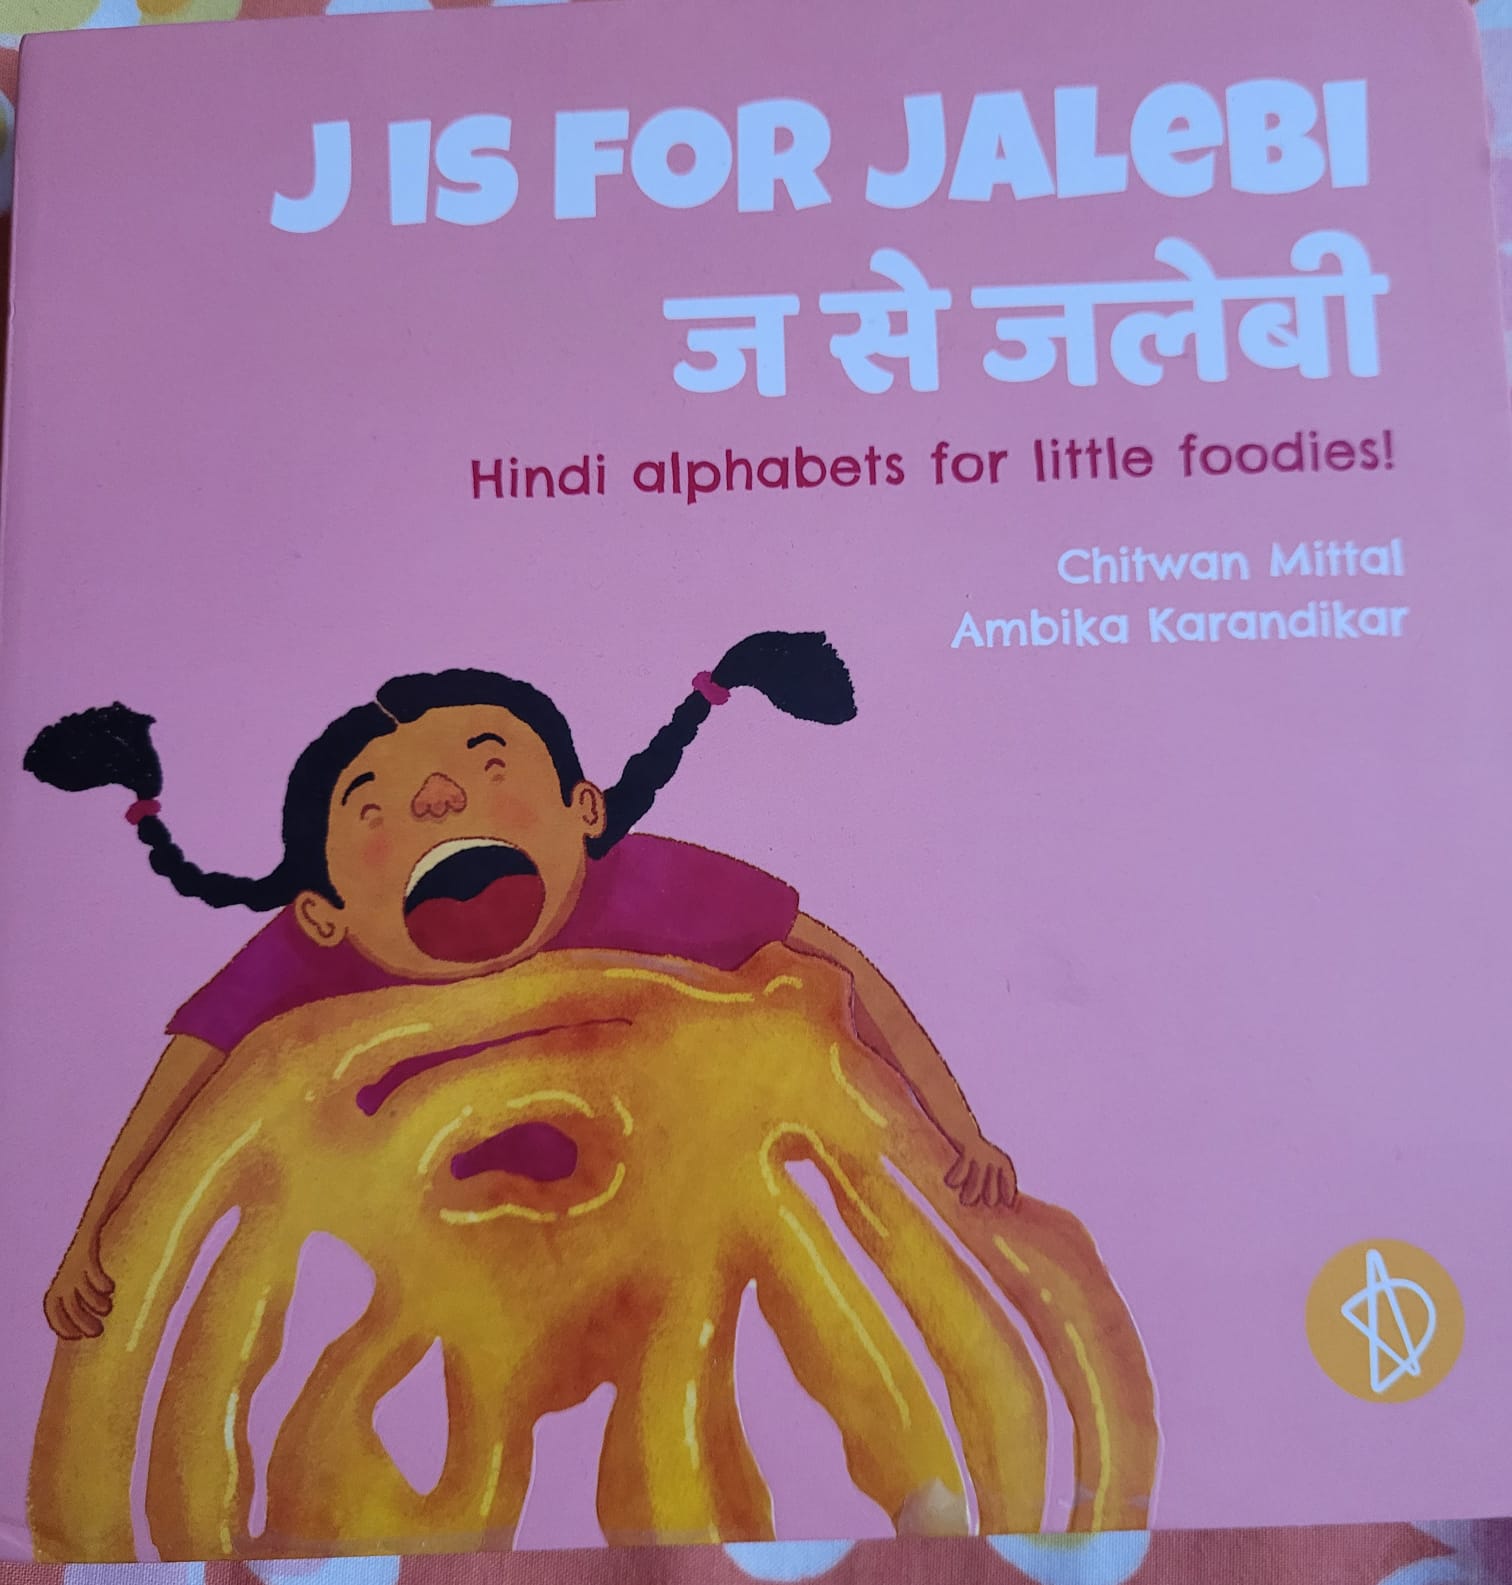 Review: J Is For Jalebi – Hindi Alphabets For Little Foodies!